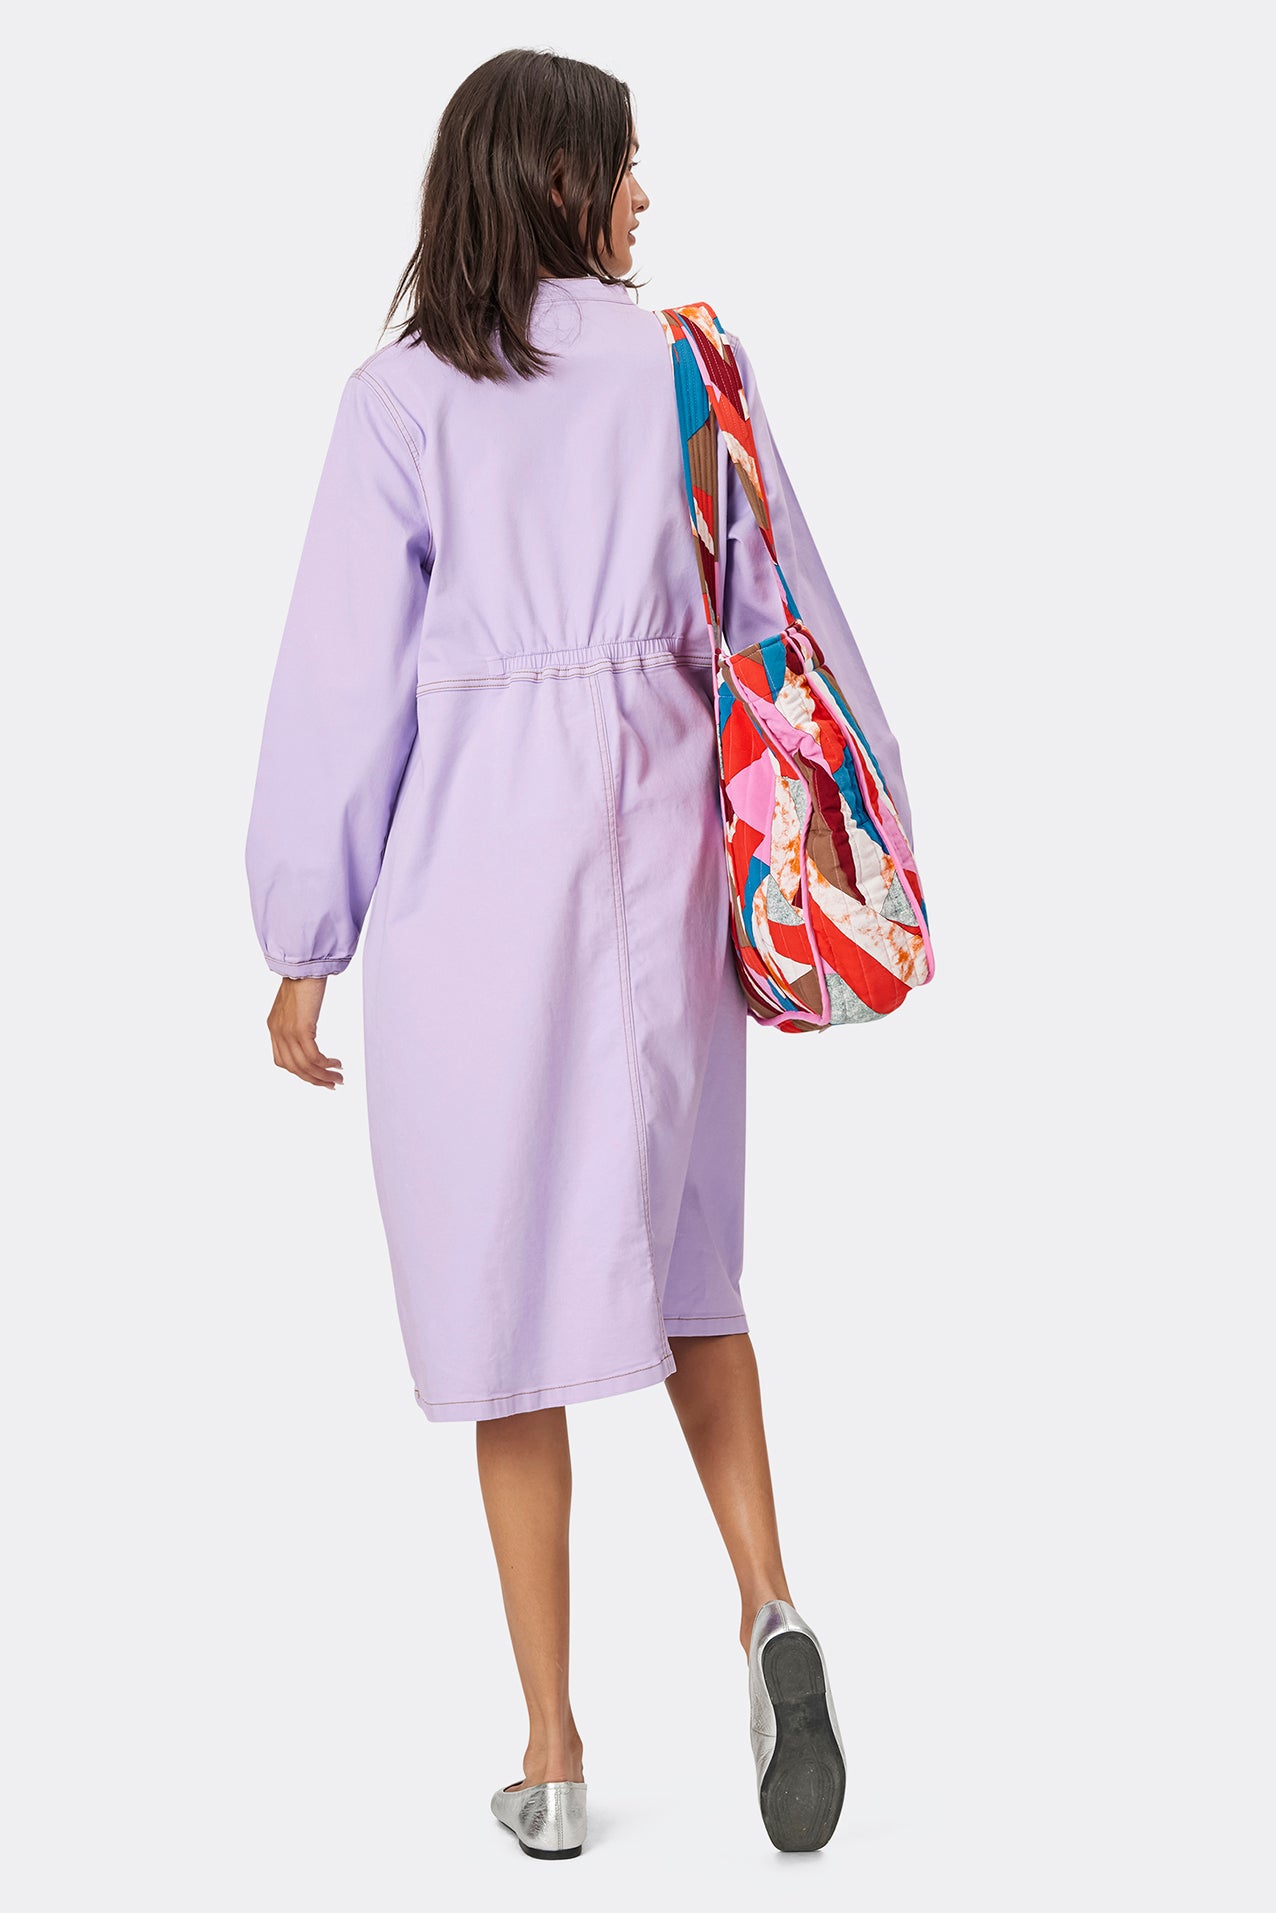 Lollys Laundry Dundee Dress - Lavender